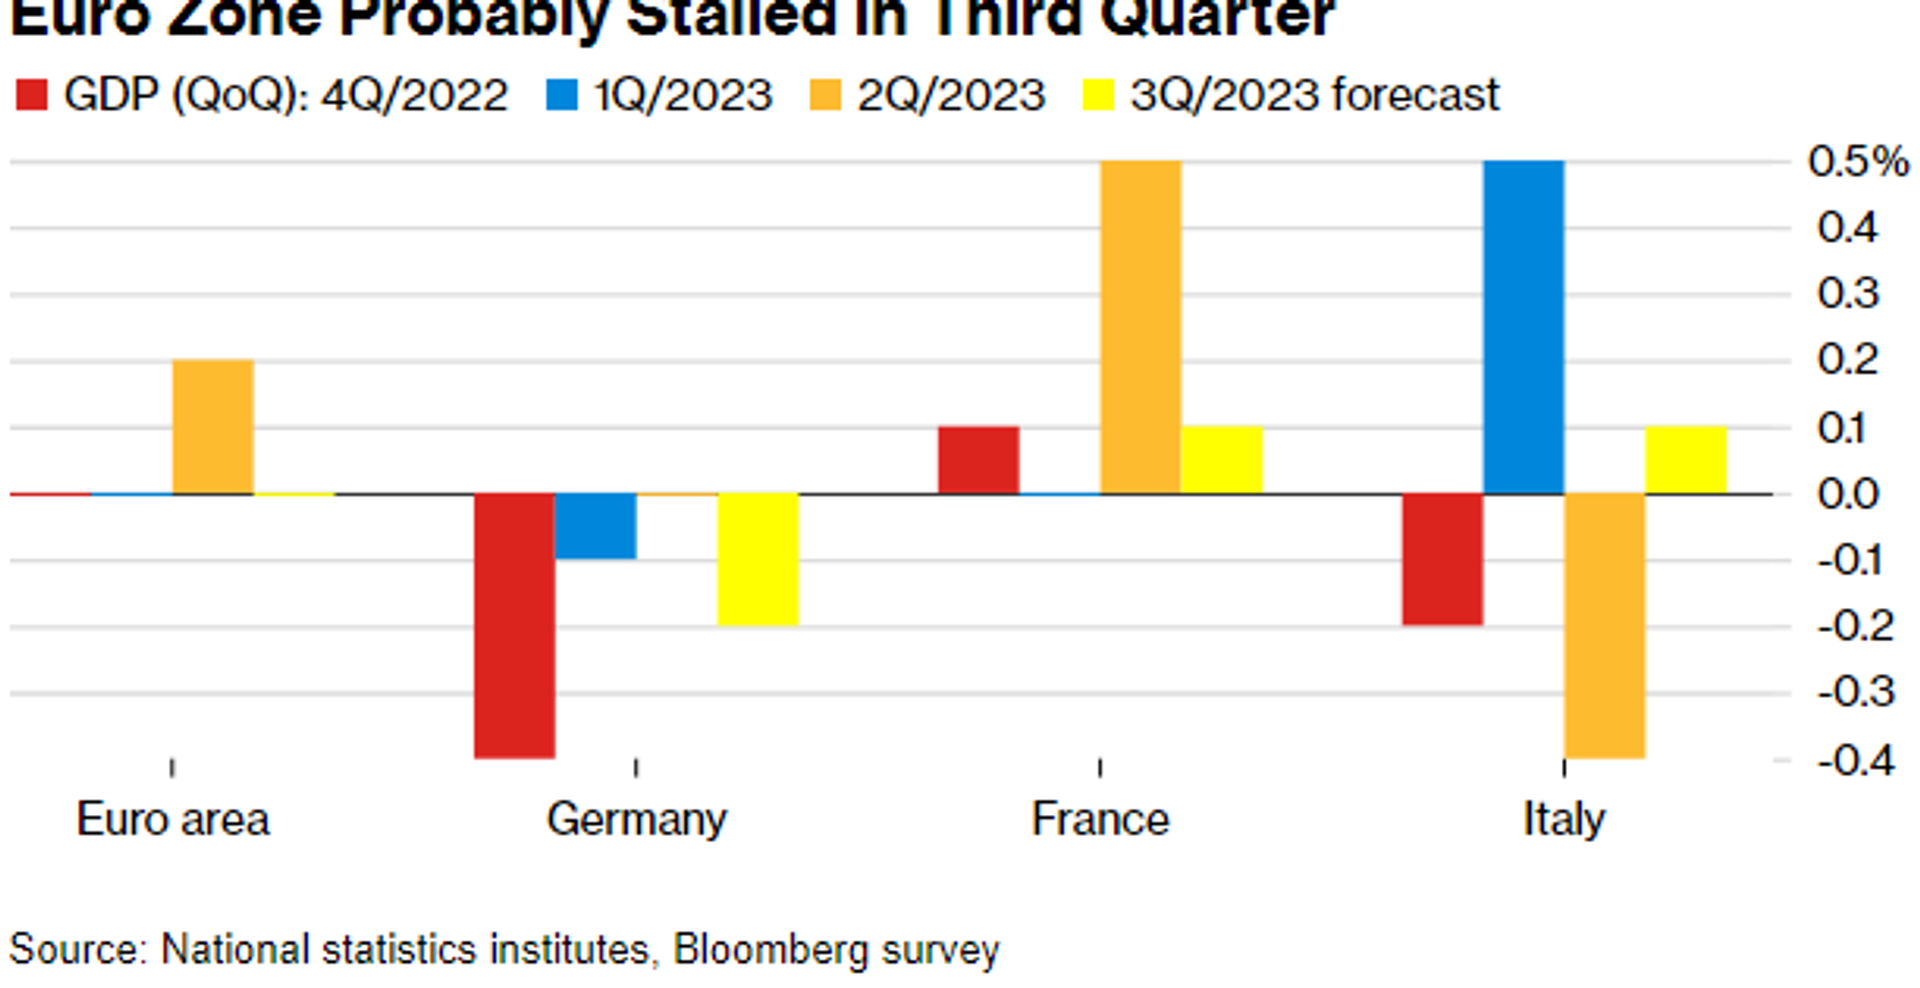 Screengrab of chart by National statistics institutes/ Bloomberg survey, showing that the Euro Zone economy probably stalled in third quarter of 2023. - Sputnik International, 1920, 28.10.2023